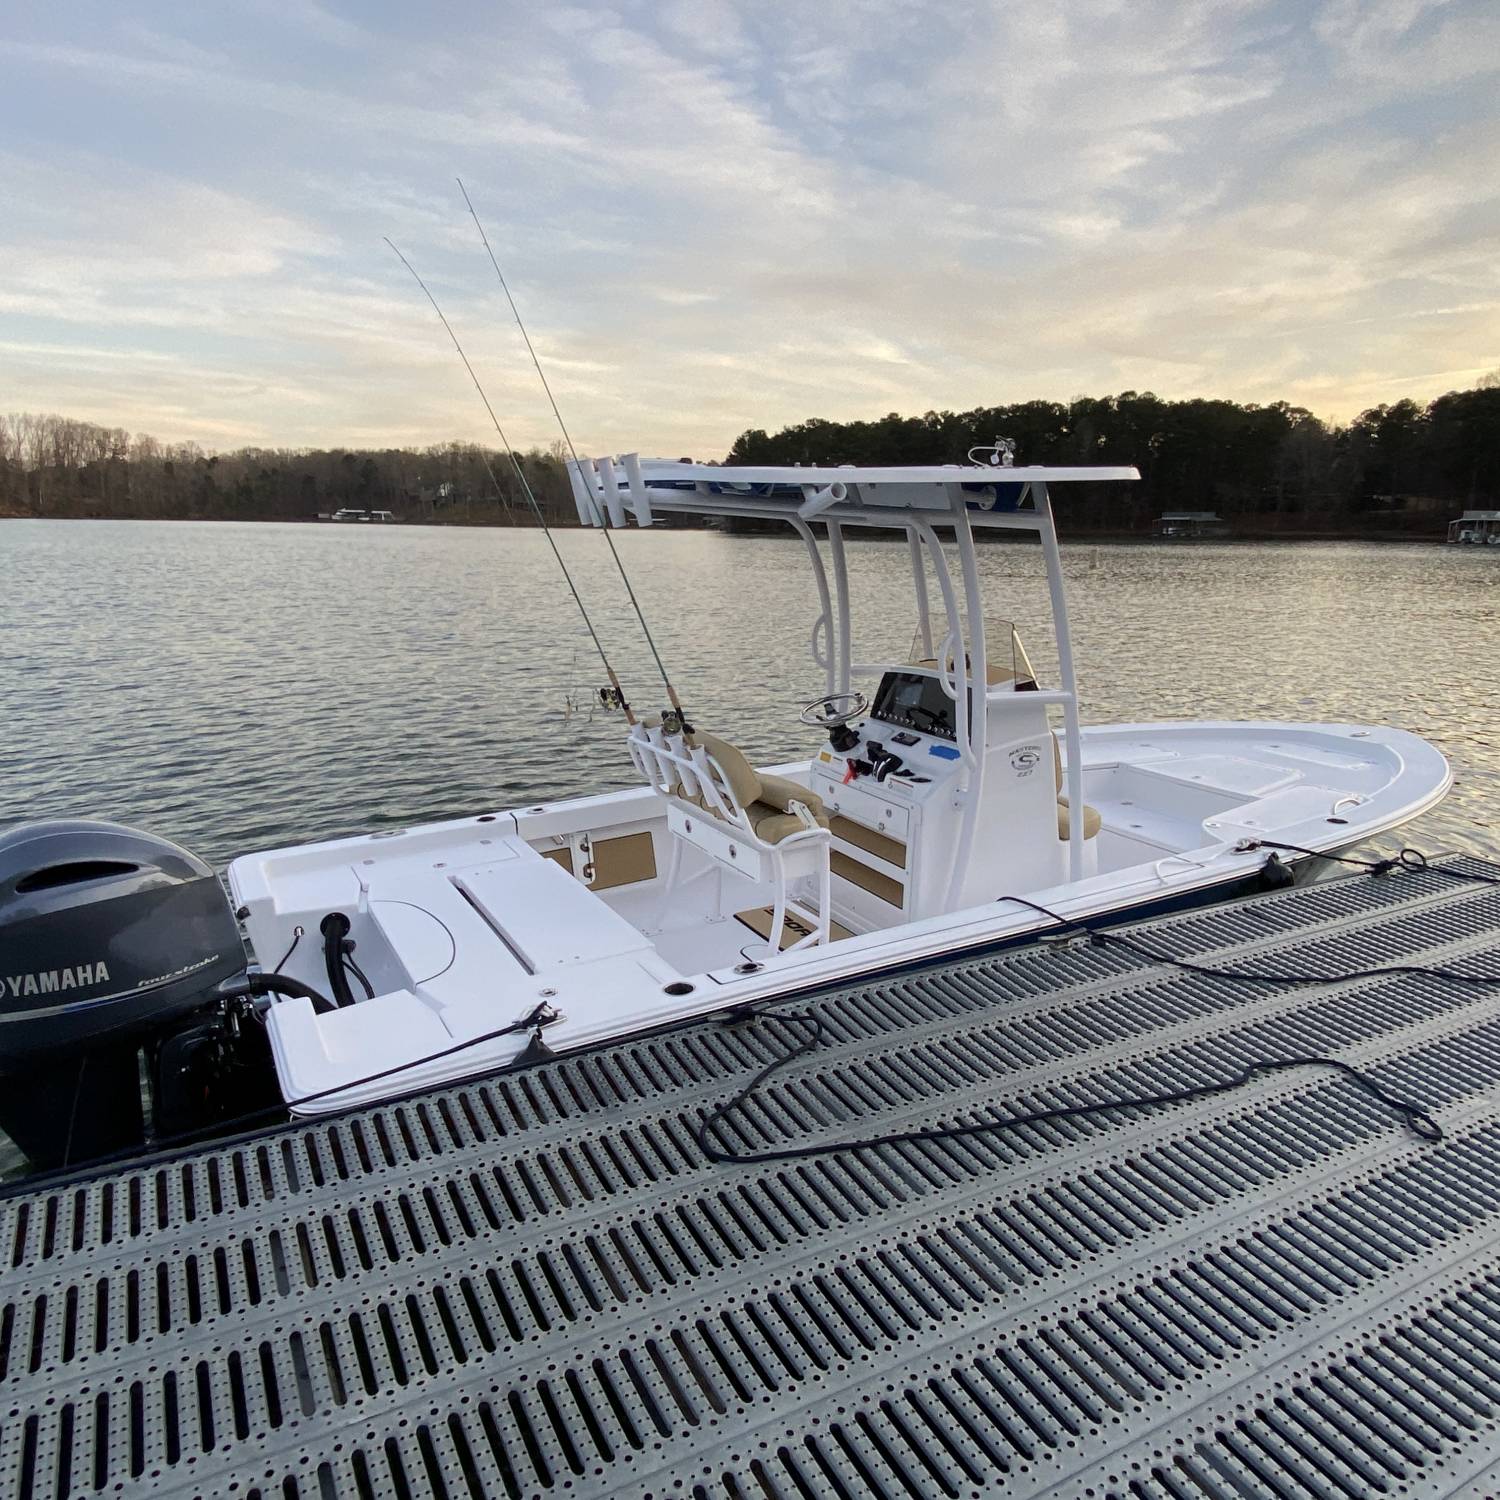 Title: 2022 Masters 227 Platinum - On board their Sportsman Masters 227 Bay Boat - Location: Buford, Ga. Participating in the Photo Contest #SportsmanApril